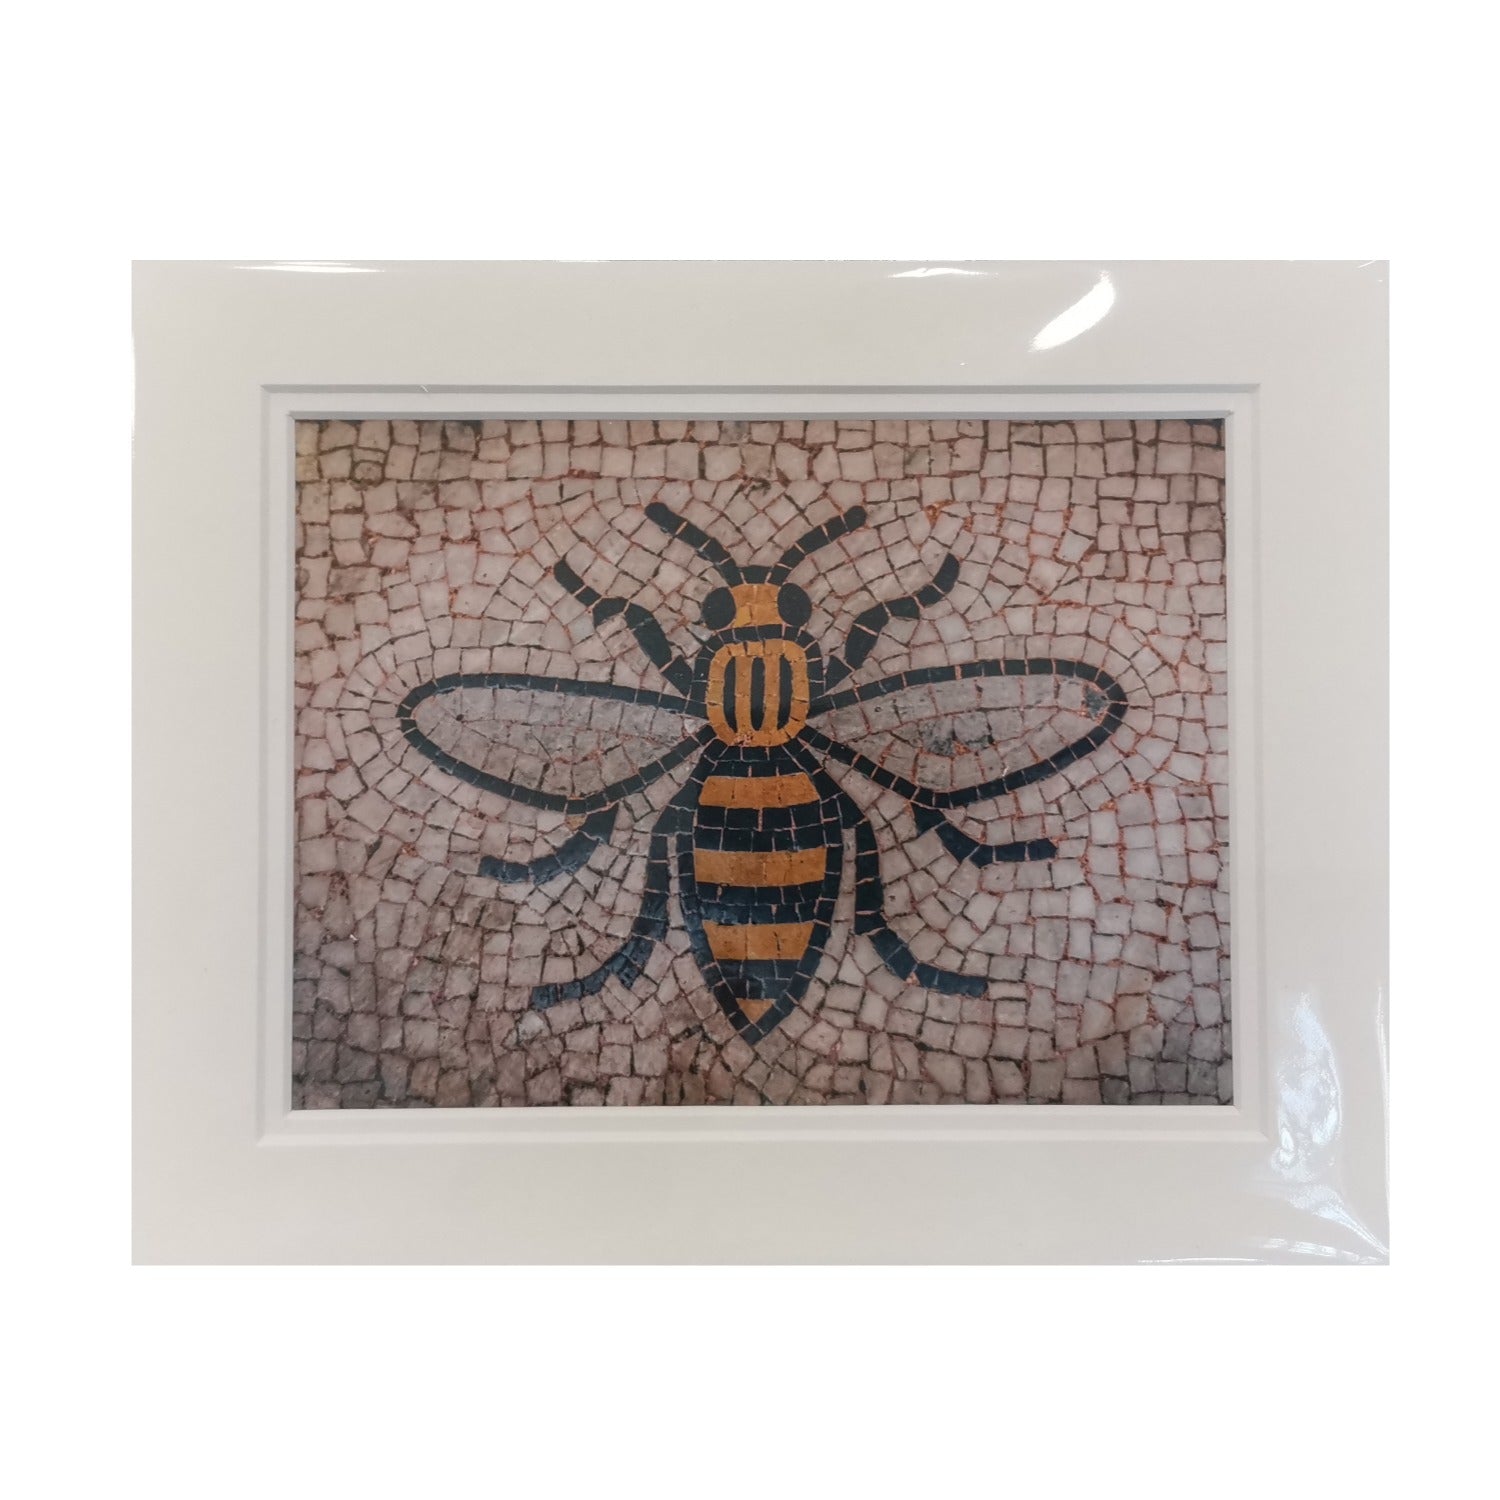 Mosaic worker bee image in a mounted frame